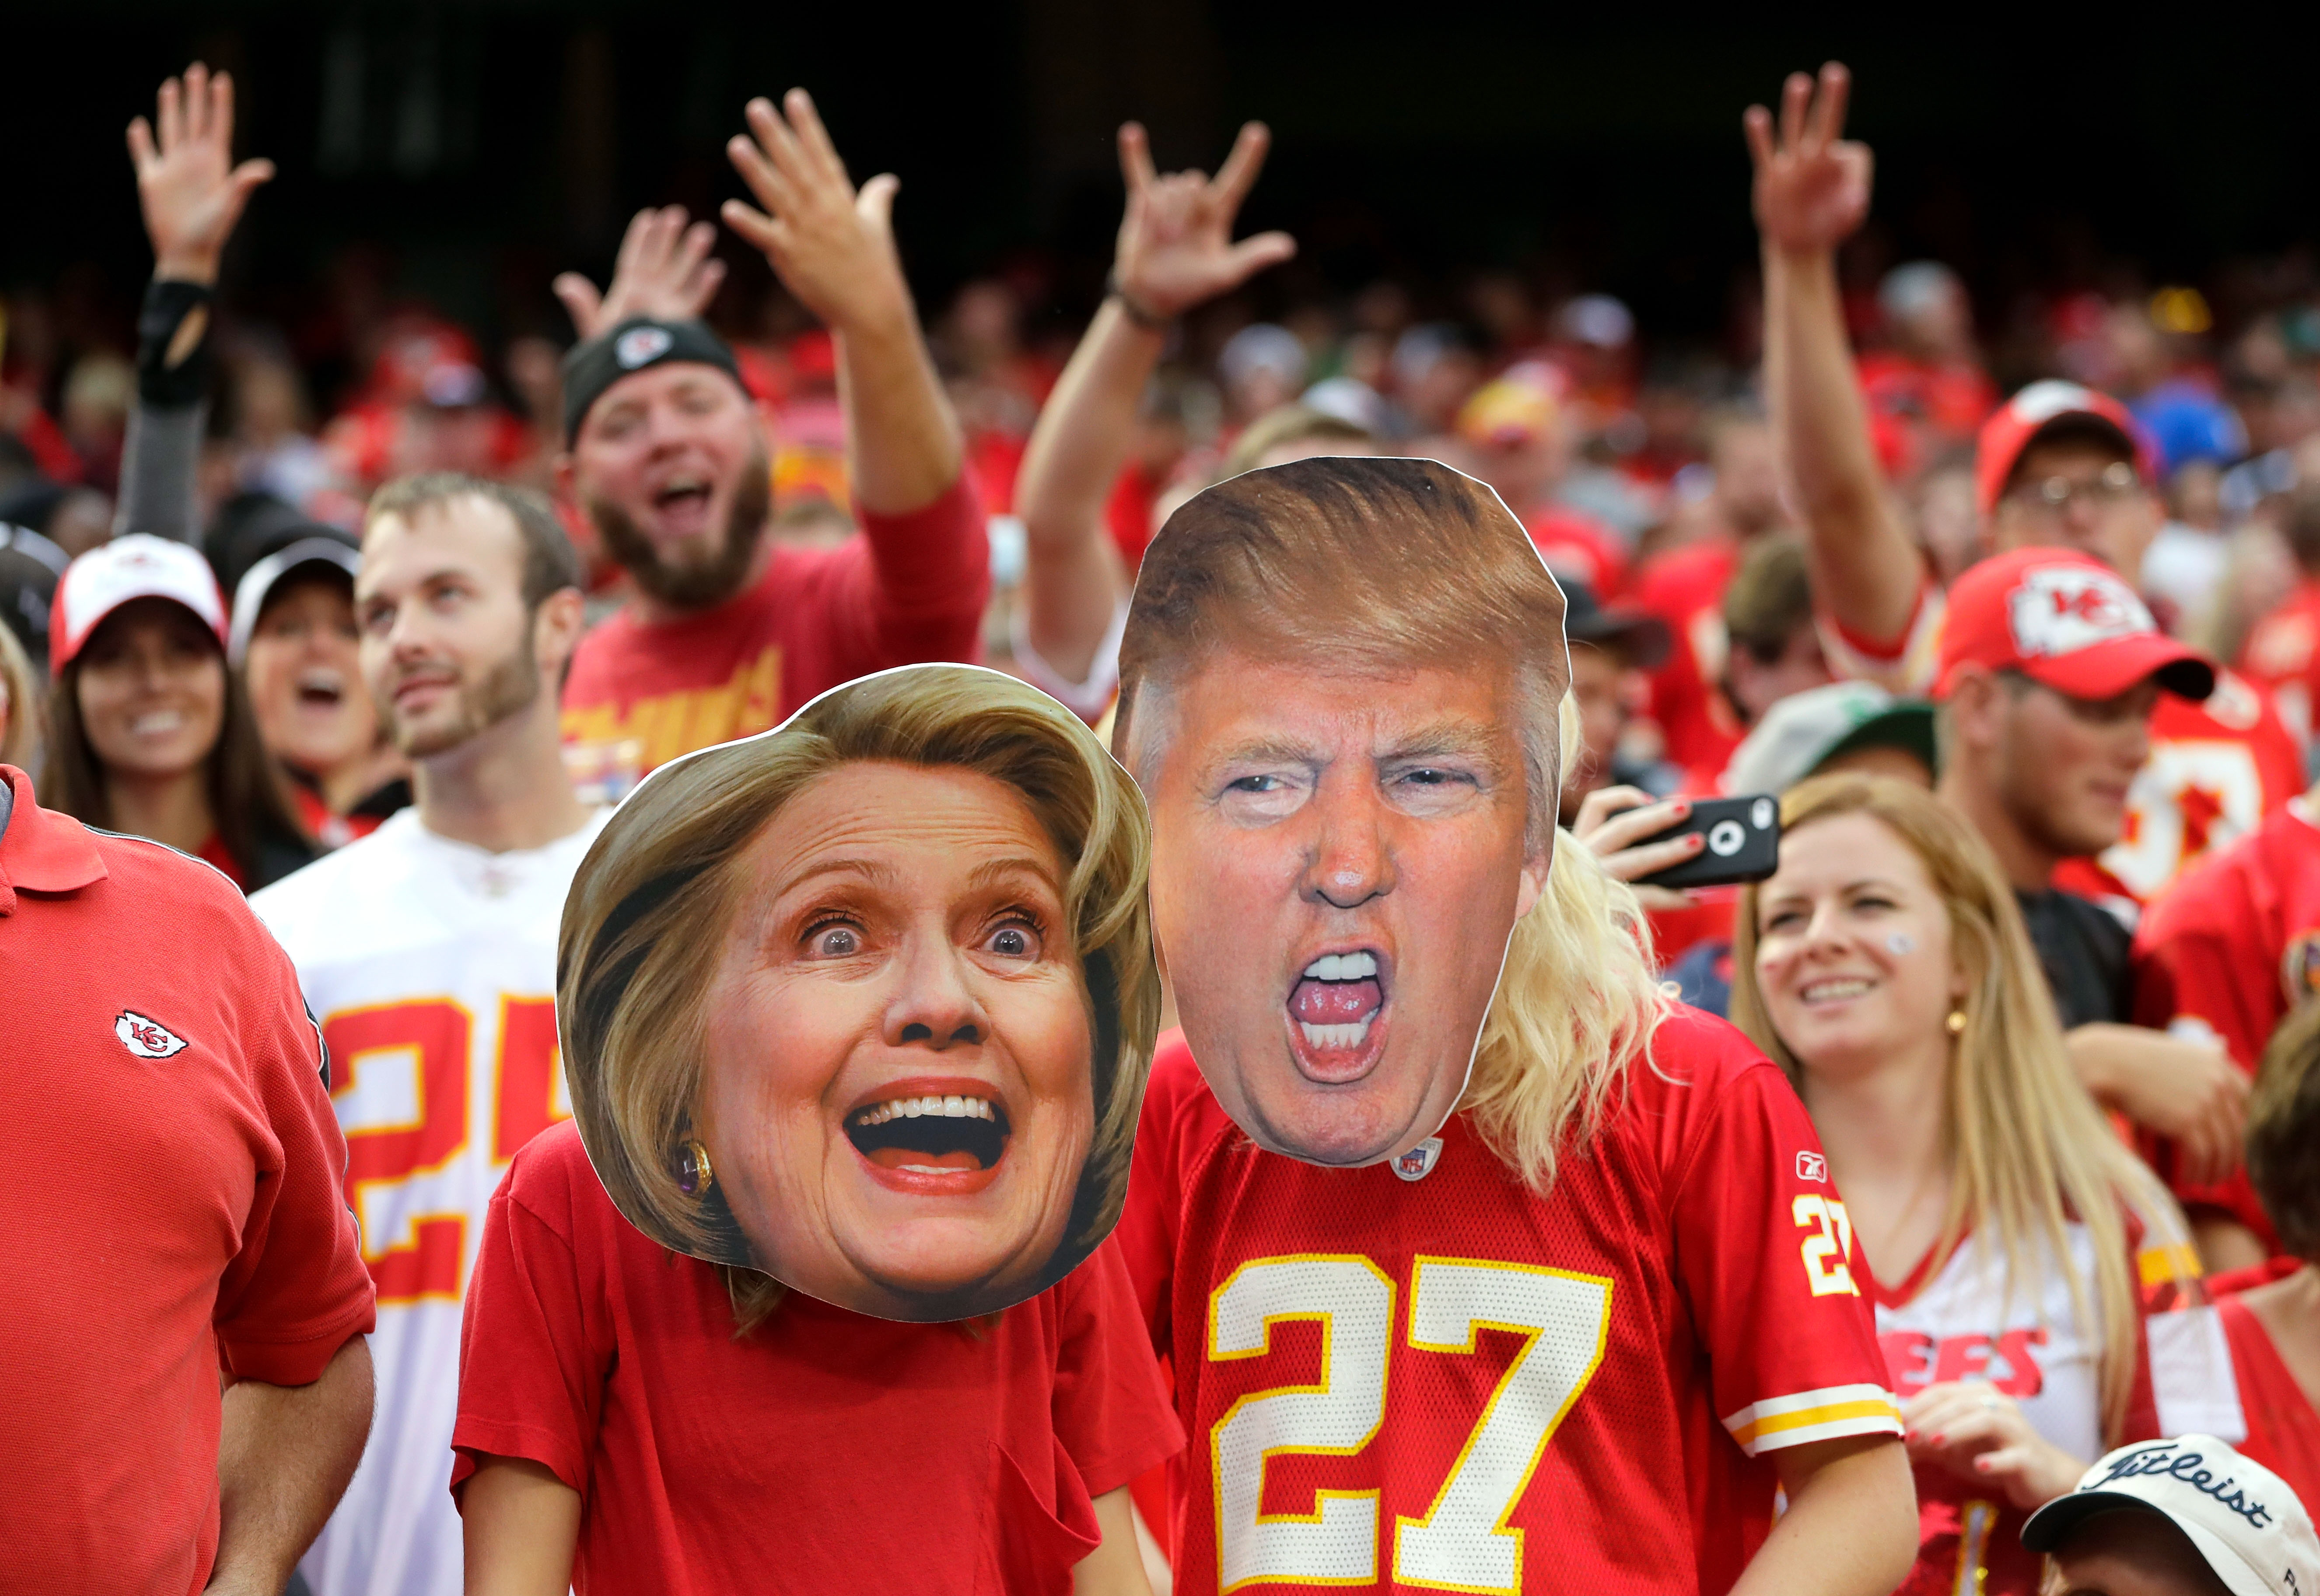 KANSAS CITY, MO - SEPTEMBER 25:  Kansas City Chiefs fans wear Hillary Clinton and Donald Trump masks during the game bethween the Chiefs and the New York Jets at Arrowhead Stadium on September 25, 2016 in Kansas City, Missouri.  (Photo by Jamie Squire/Getty Images)